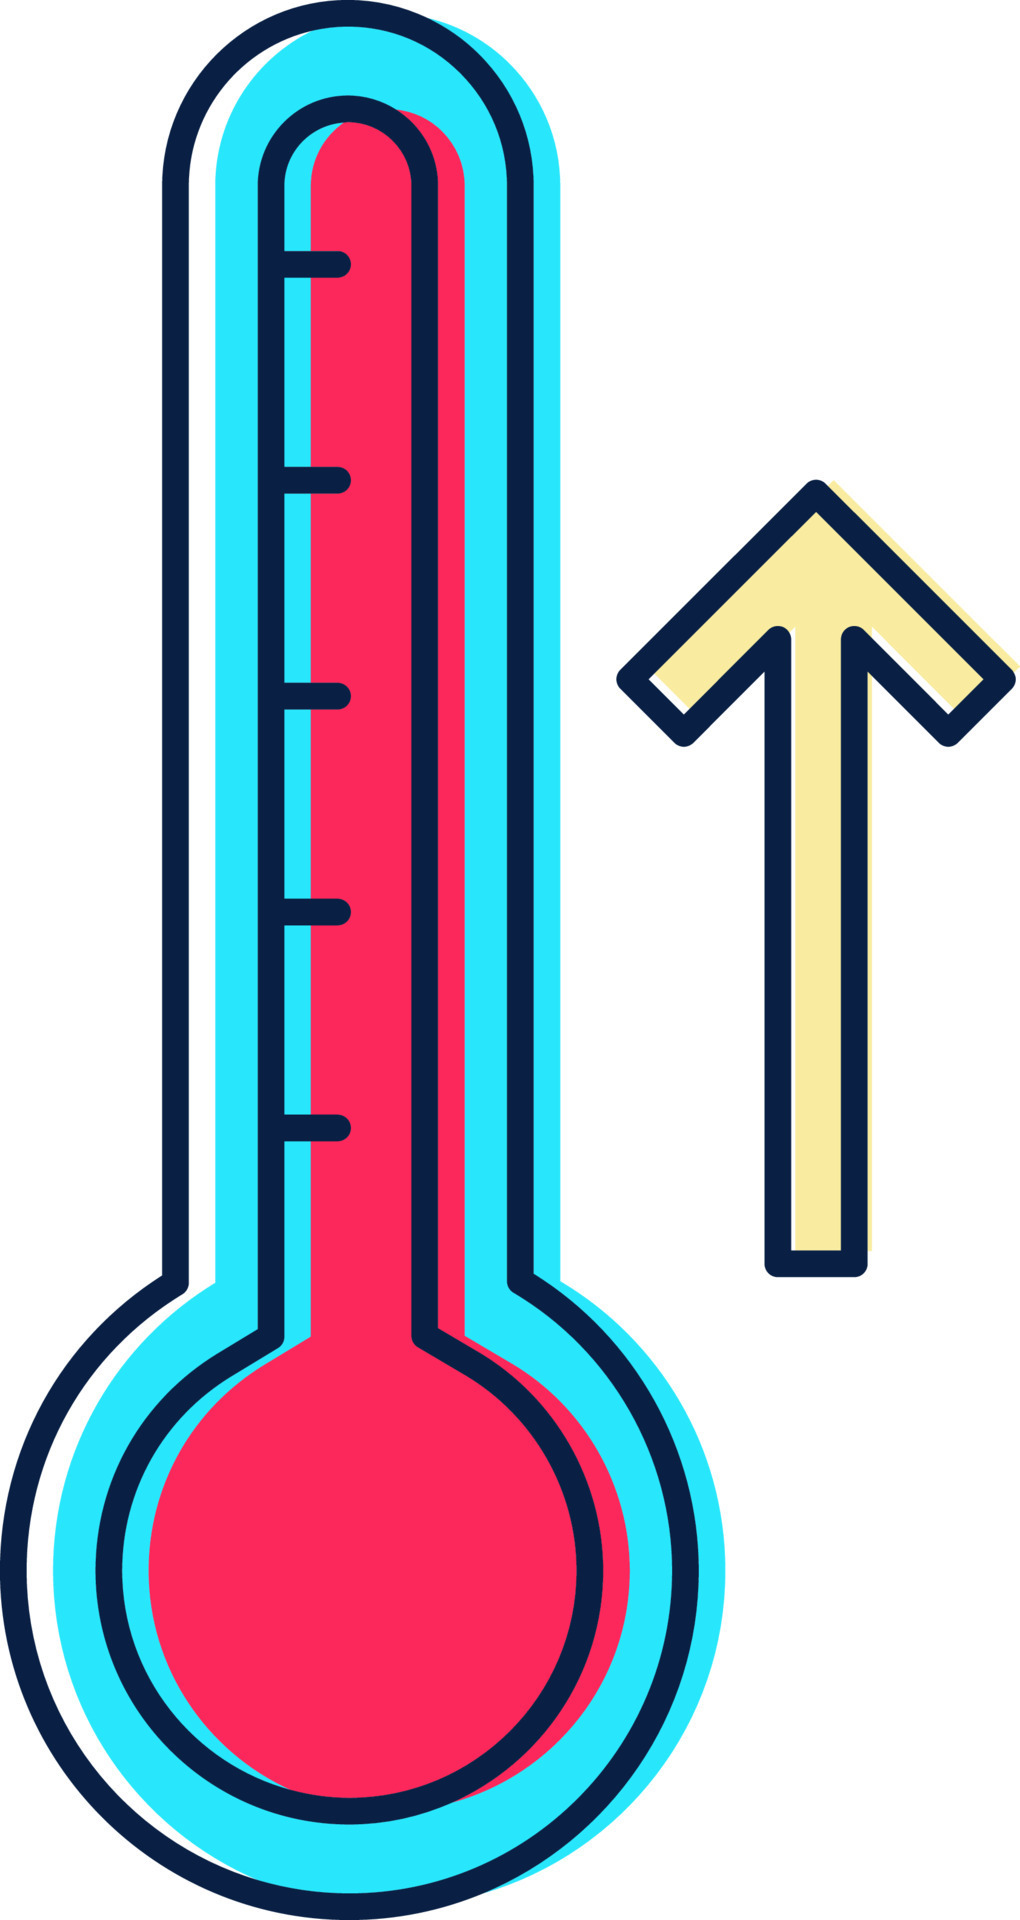 https://static.vecteezy.com/system/resources/previews/024/144/764/original/growing-thermometer-mercury-scale-of-high-temperature-red-and-blue-icon-vector.jpg